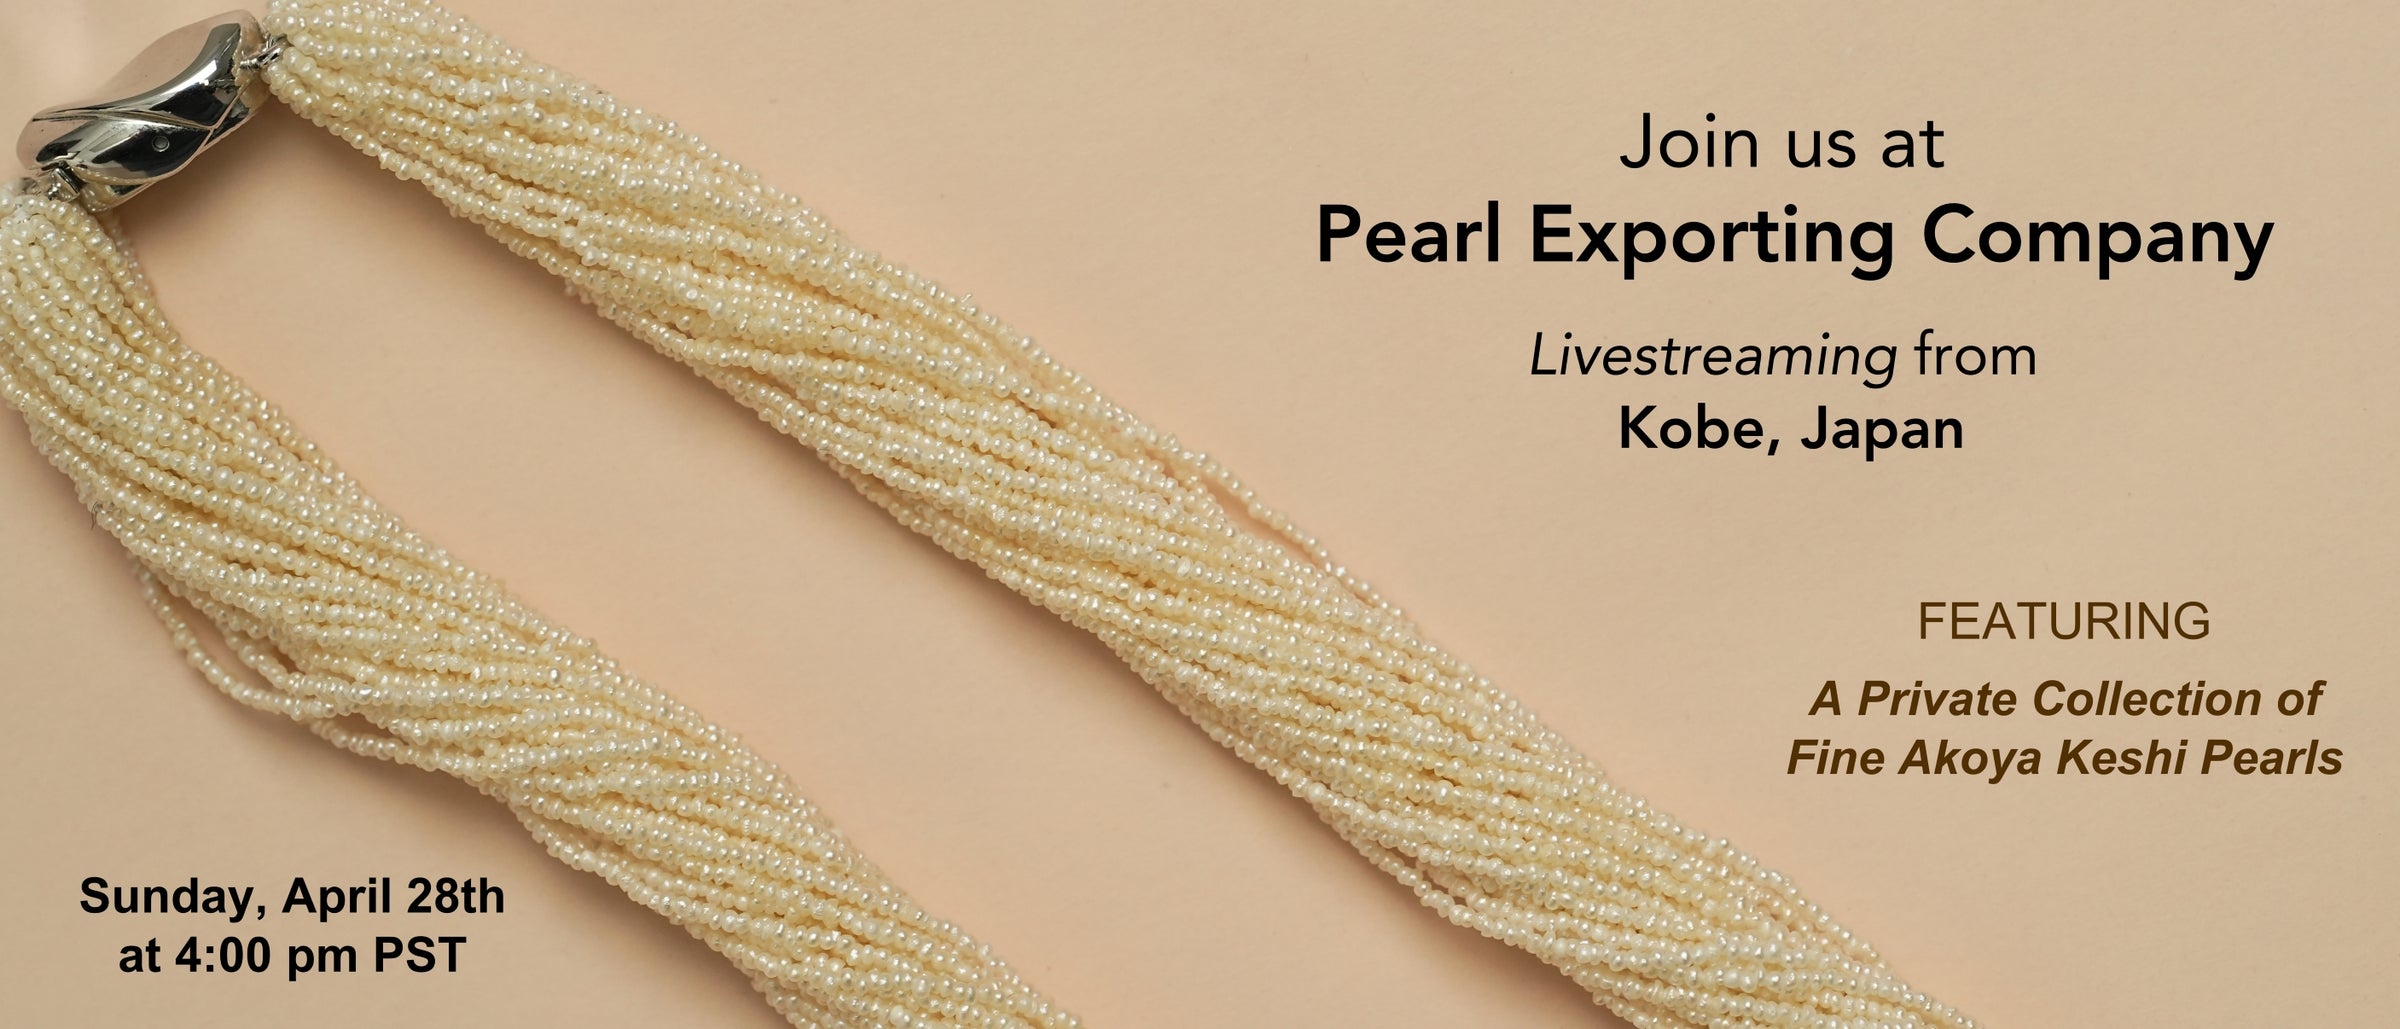 Pearl Exporting Company Kobe Japan Livestream event banner